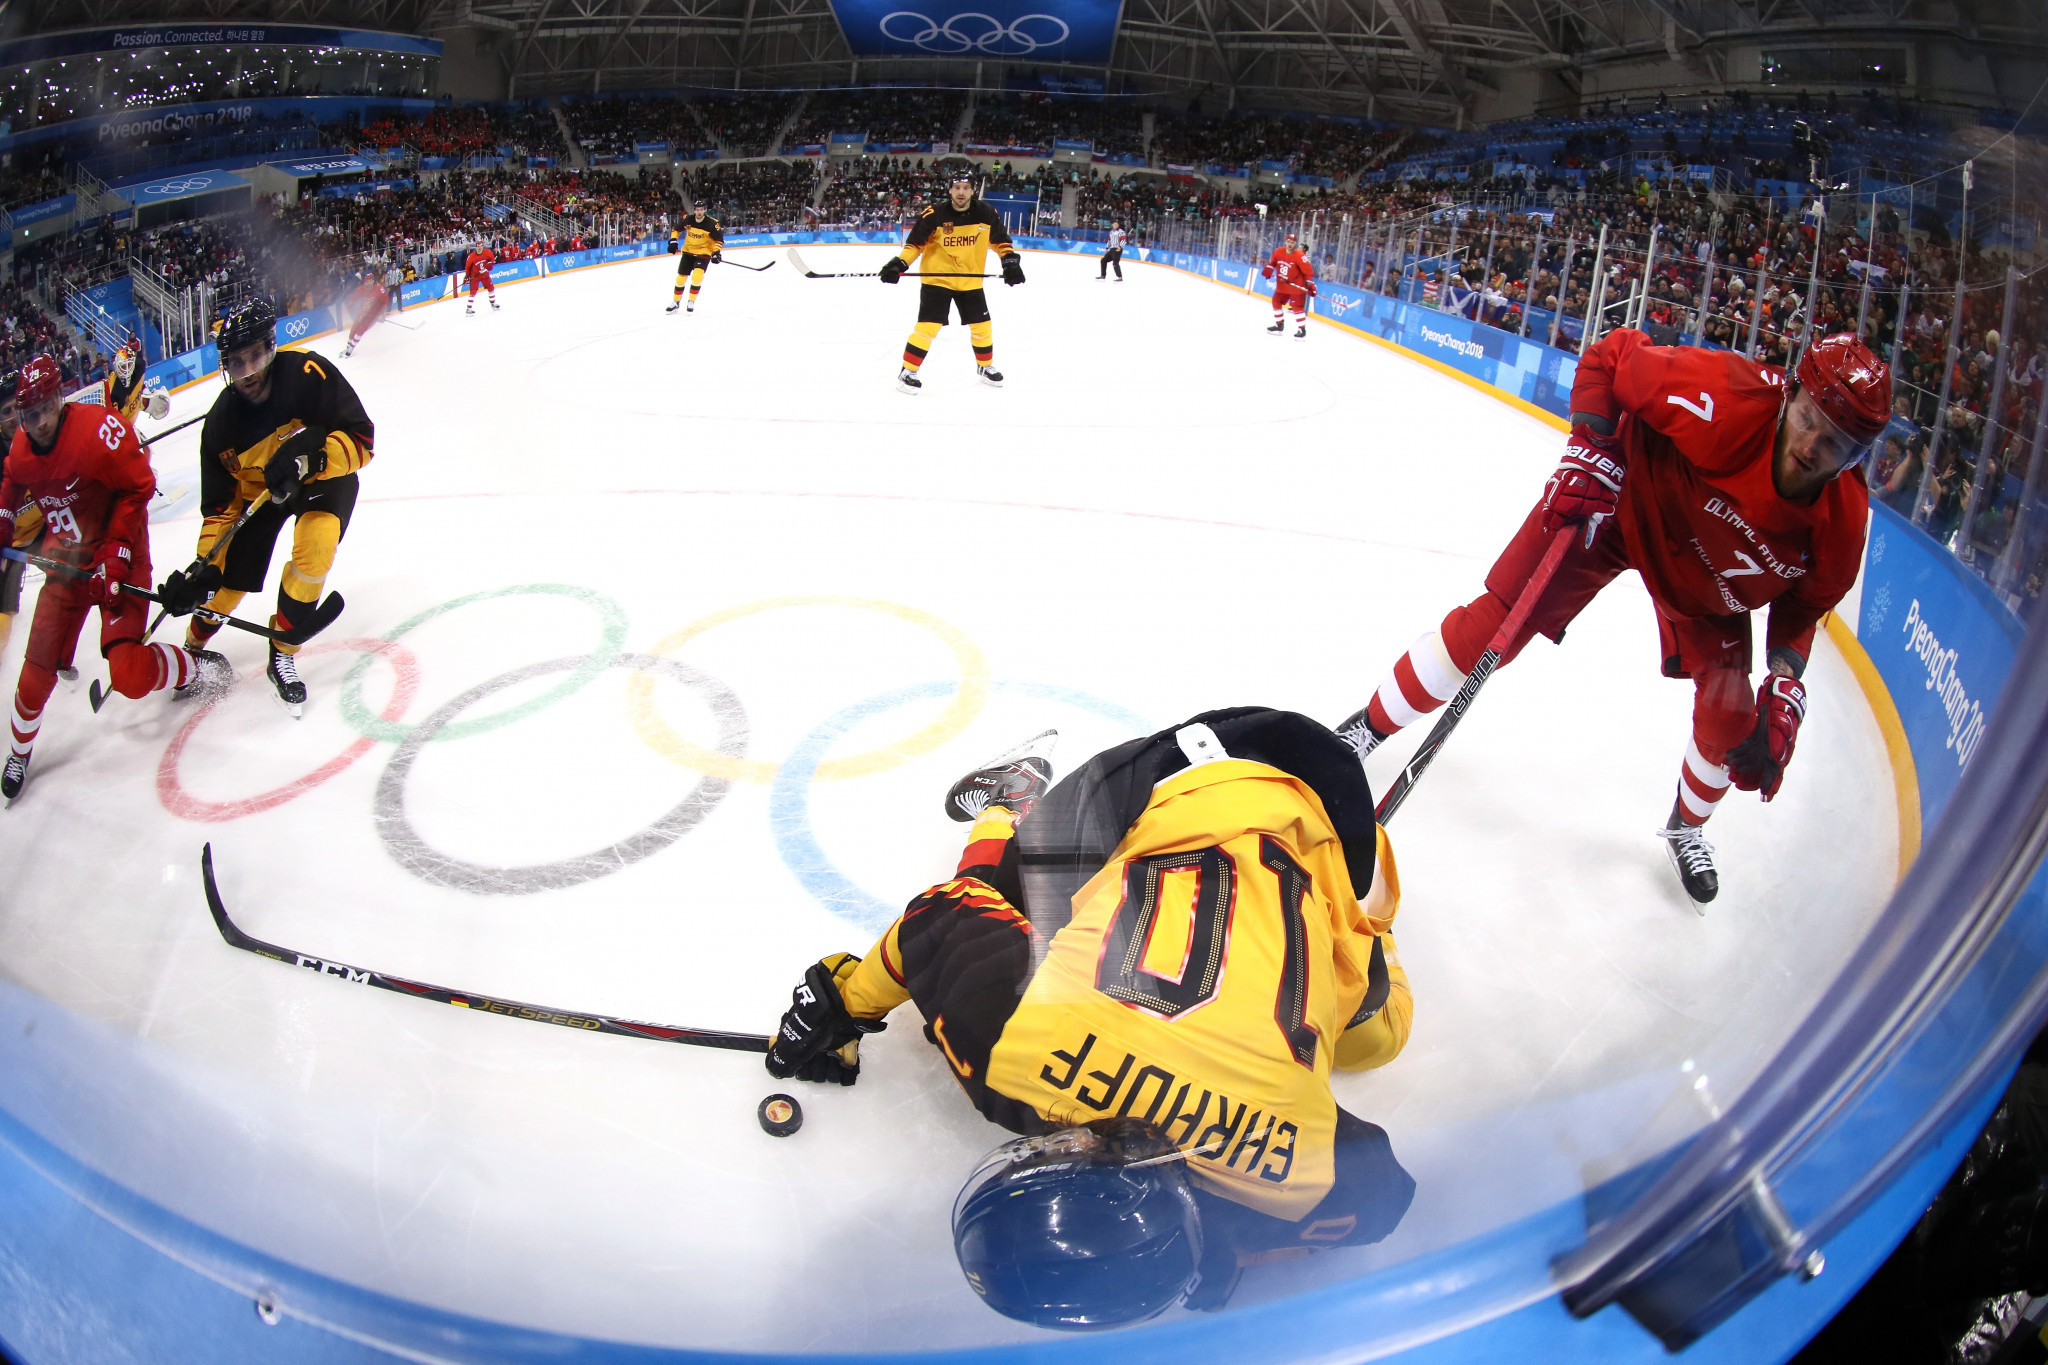 Pyeongchang 2018 was the first Olympic ice hockey tournament for nearly 25 years to take place without the top NHL players ©Getty Images